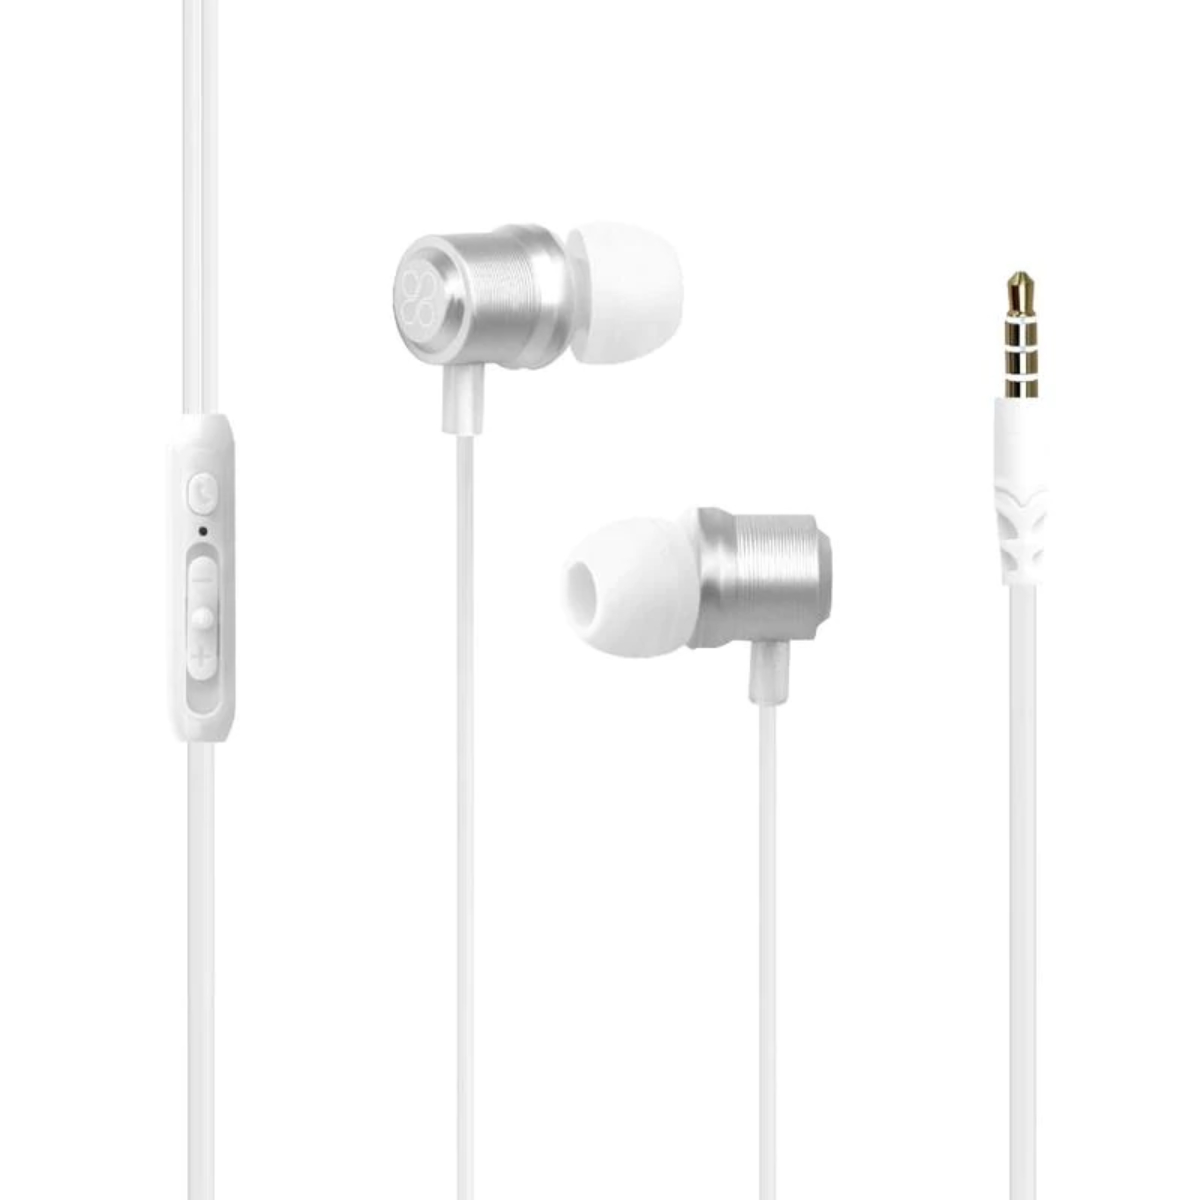 -Ear Stereo Earphones withPROMATE Travi Dynamic In In-Line Microphone ( white)